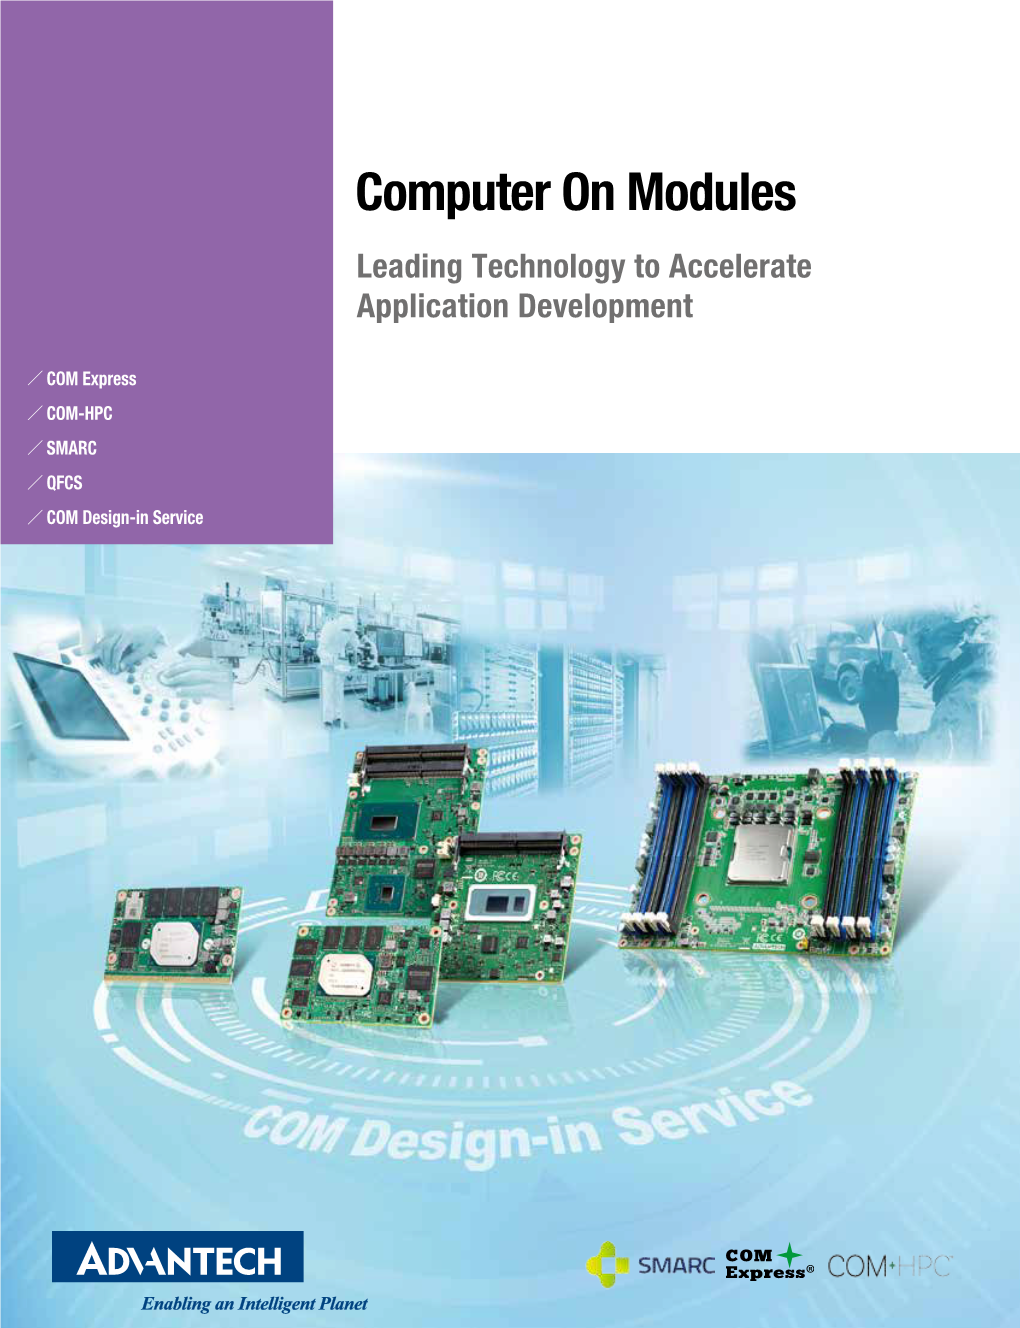 Computer on Modules Leading Technology to Accelerate Application Development